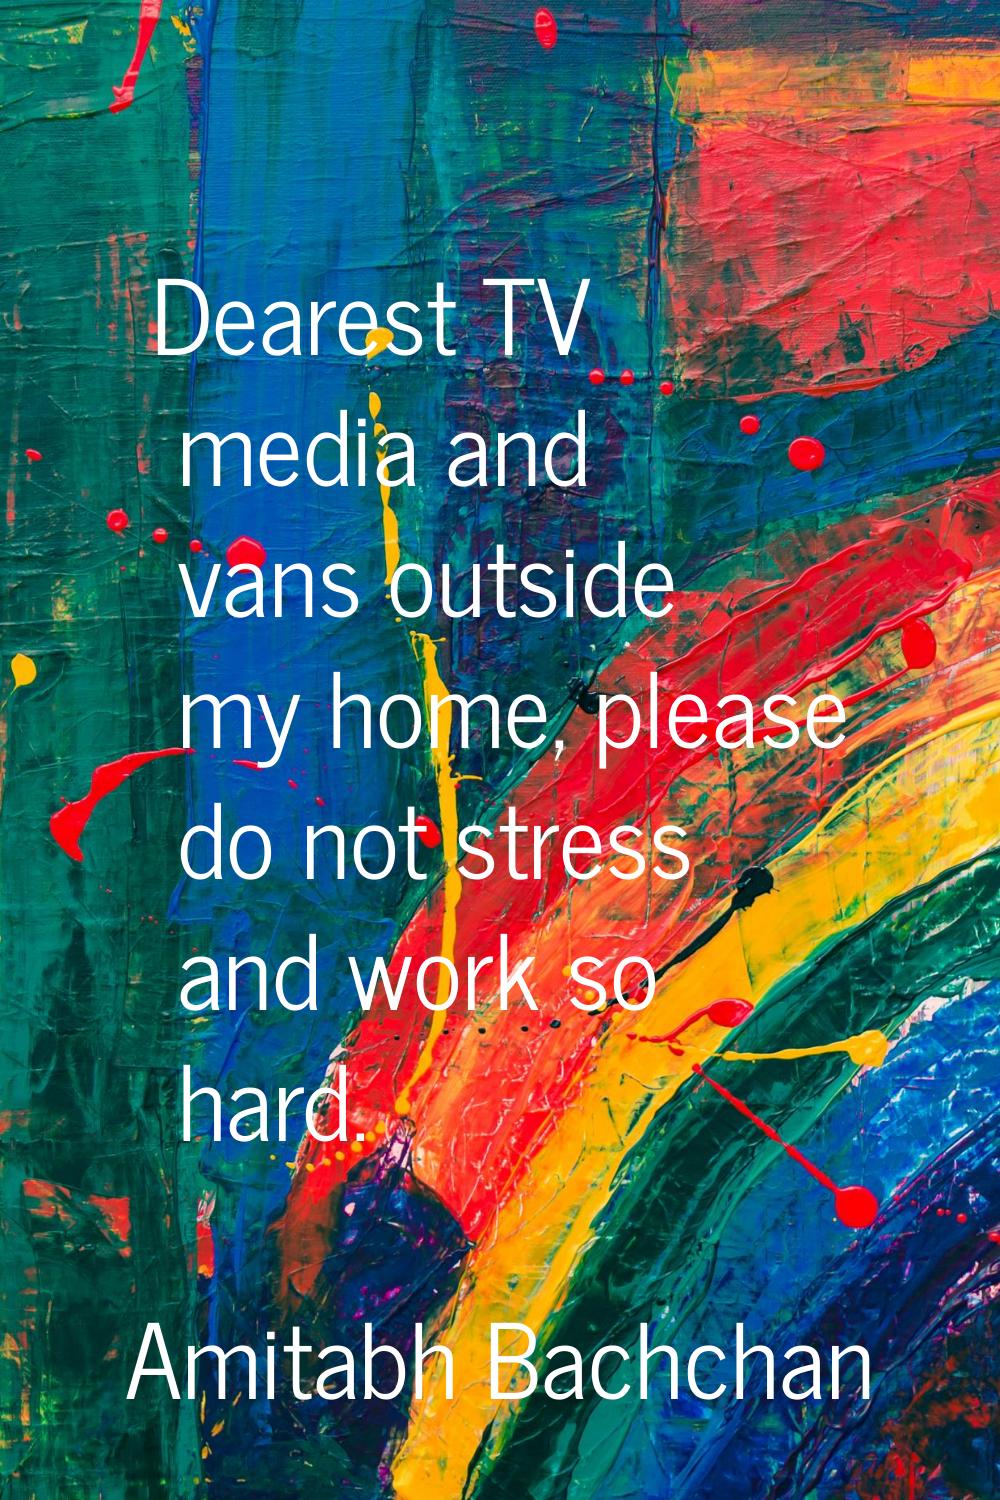 Dearest TV media and vans outside my home, please do not stress and work so hard.